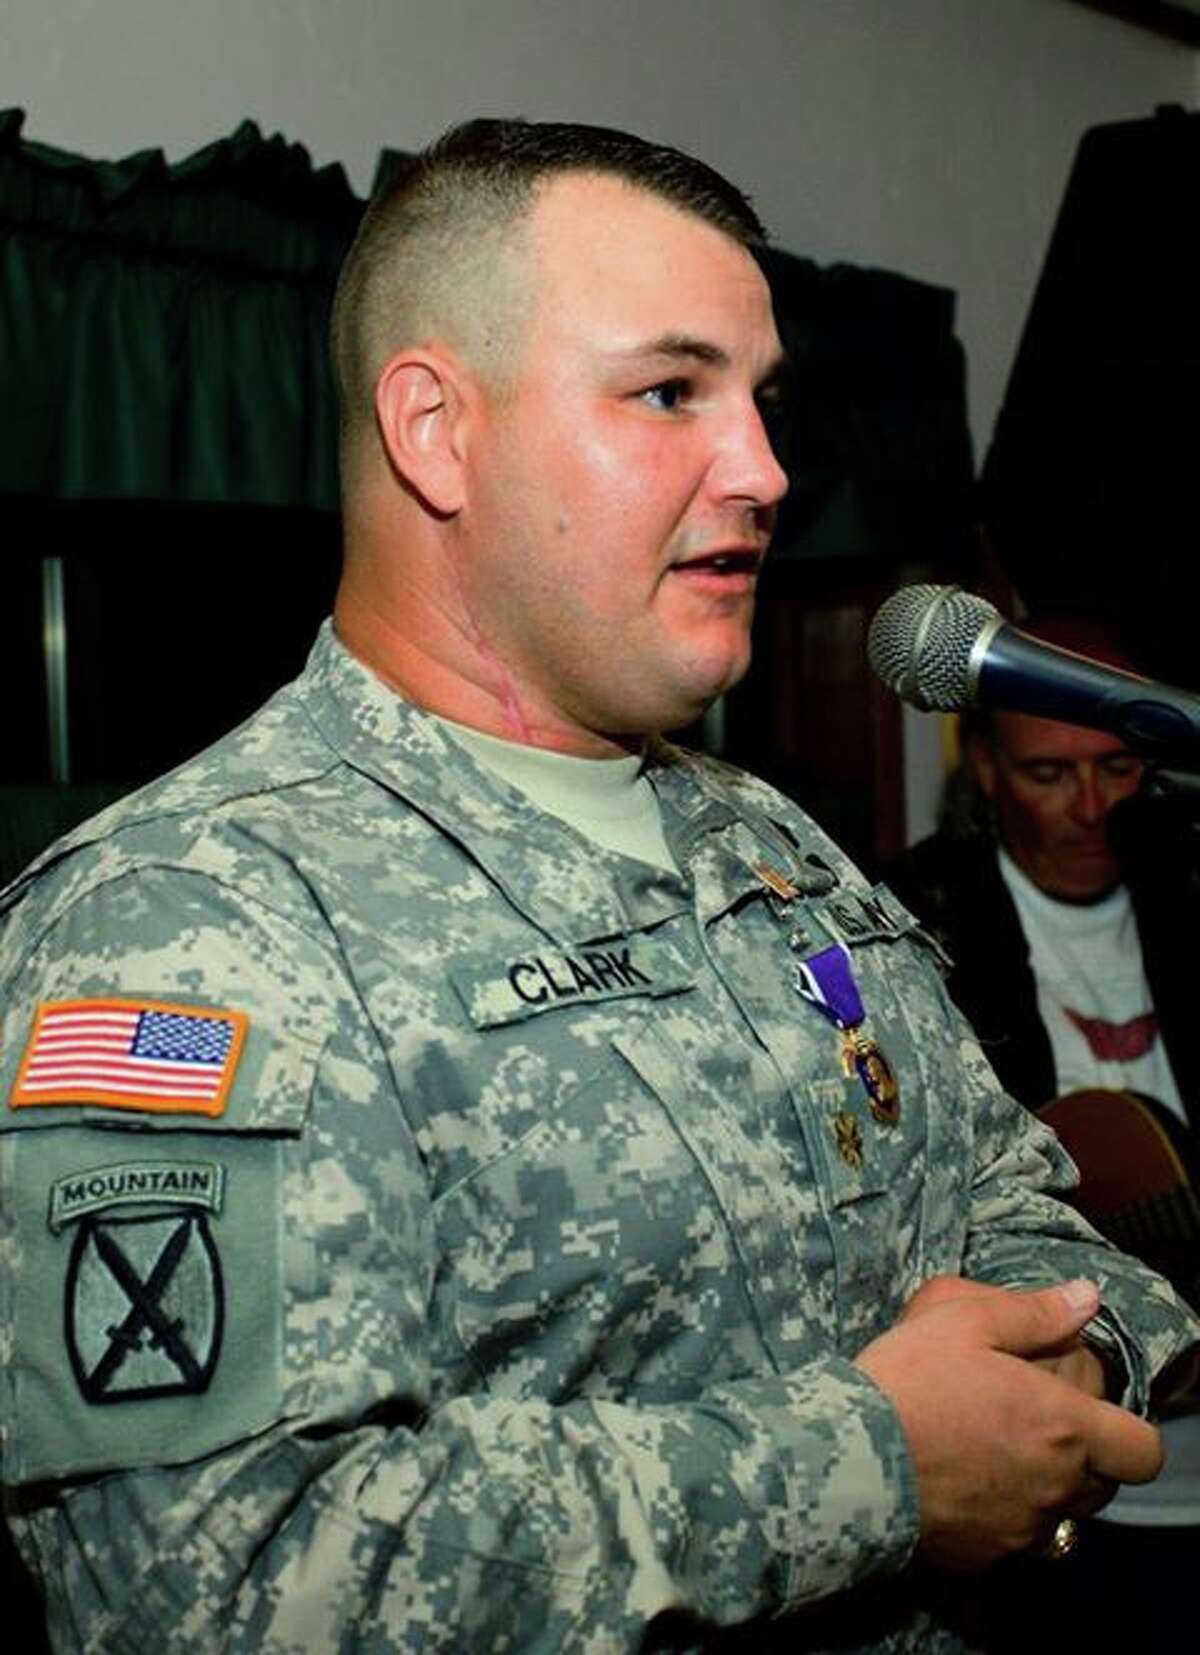 U.S. Army Lt. Col. Todd Clark, 40, an Albany native and father of two, died Saturday, June 8, 2013, while serving in Afghanistan. (Photo via Mike Connors)